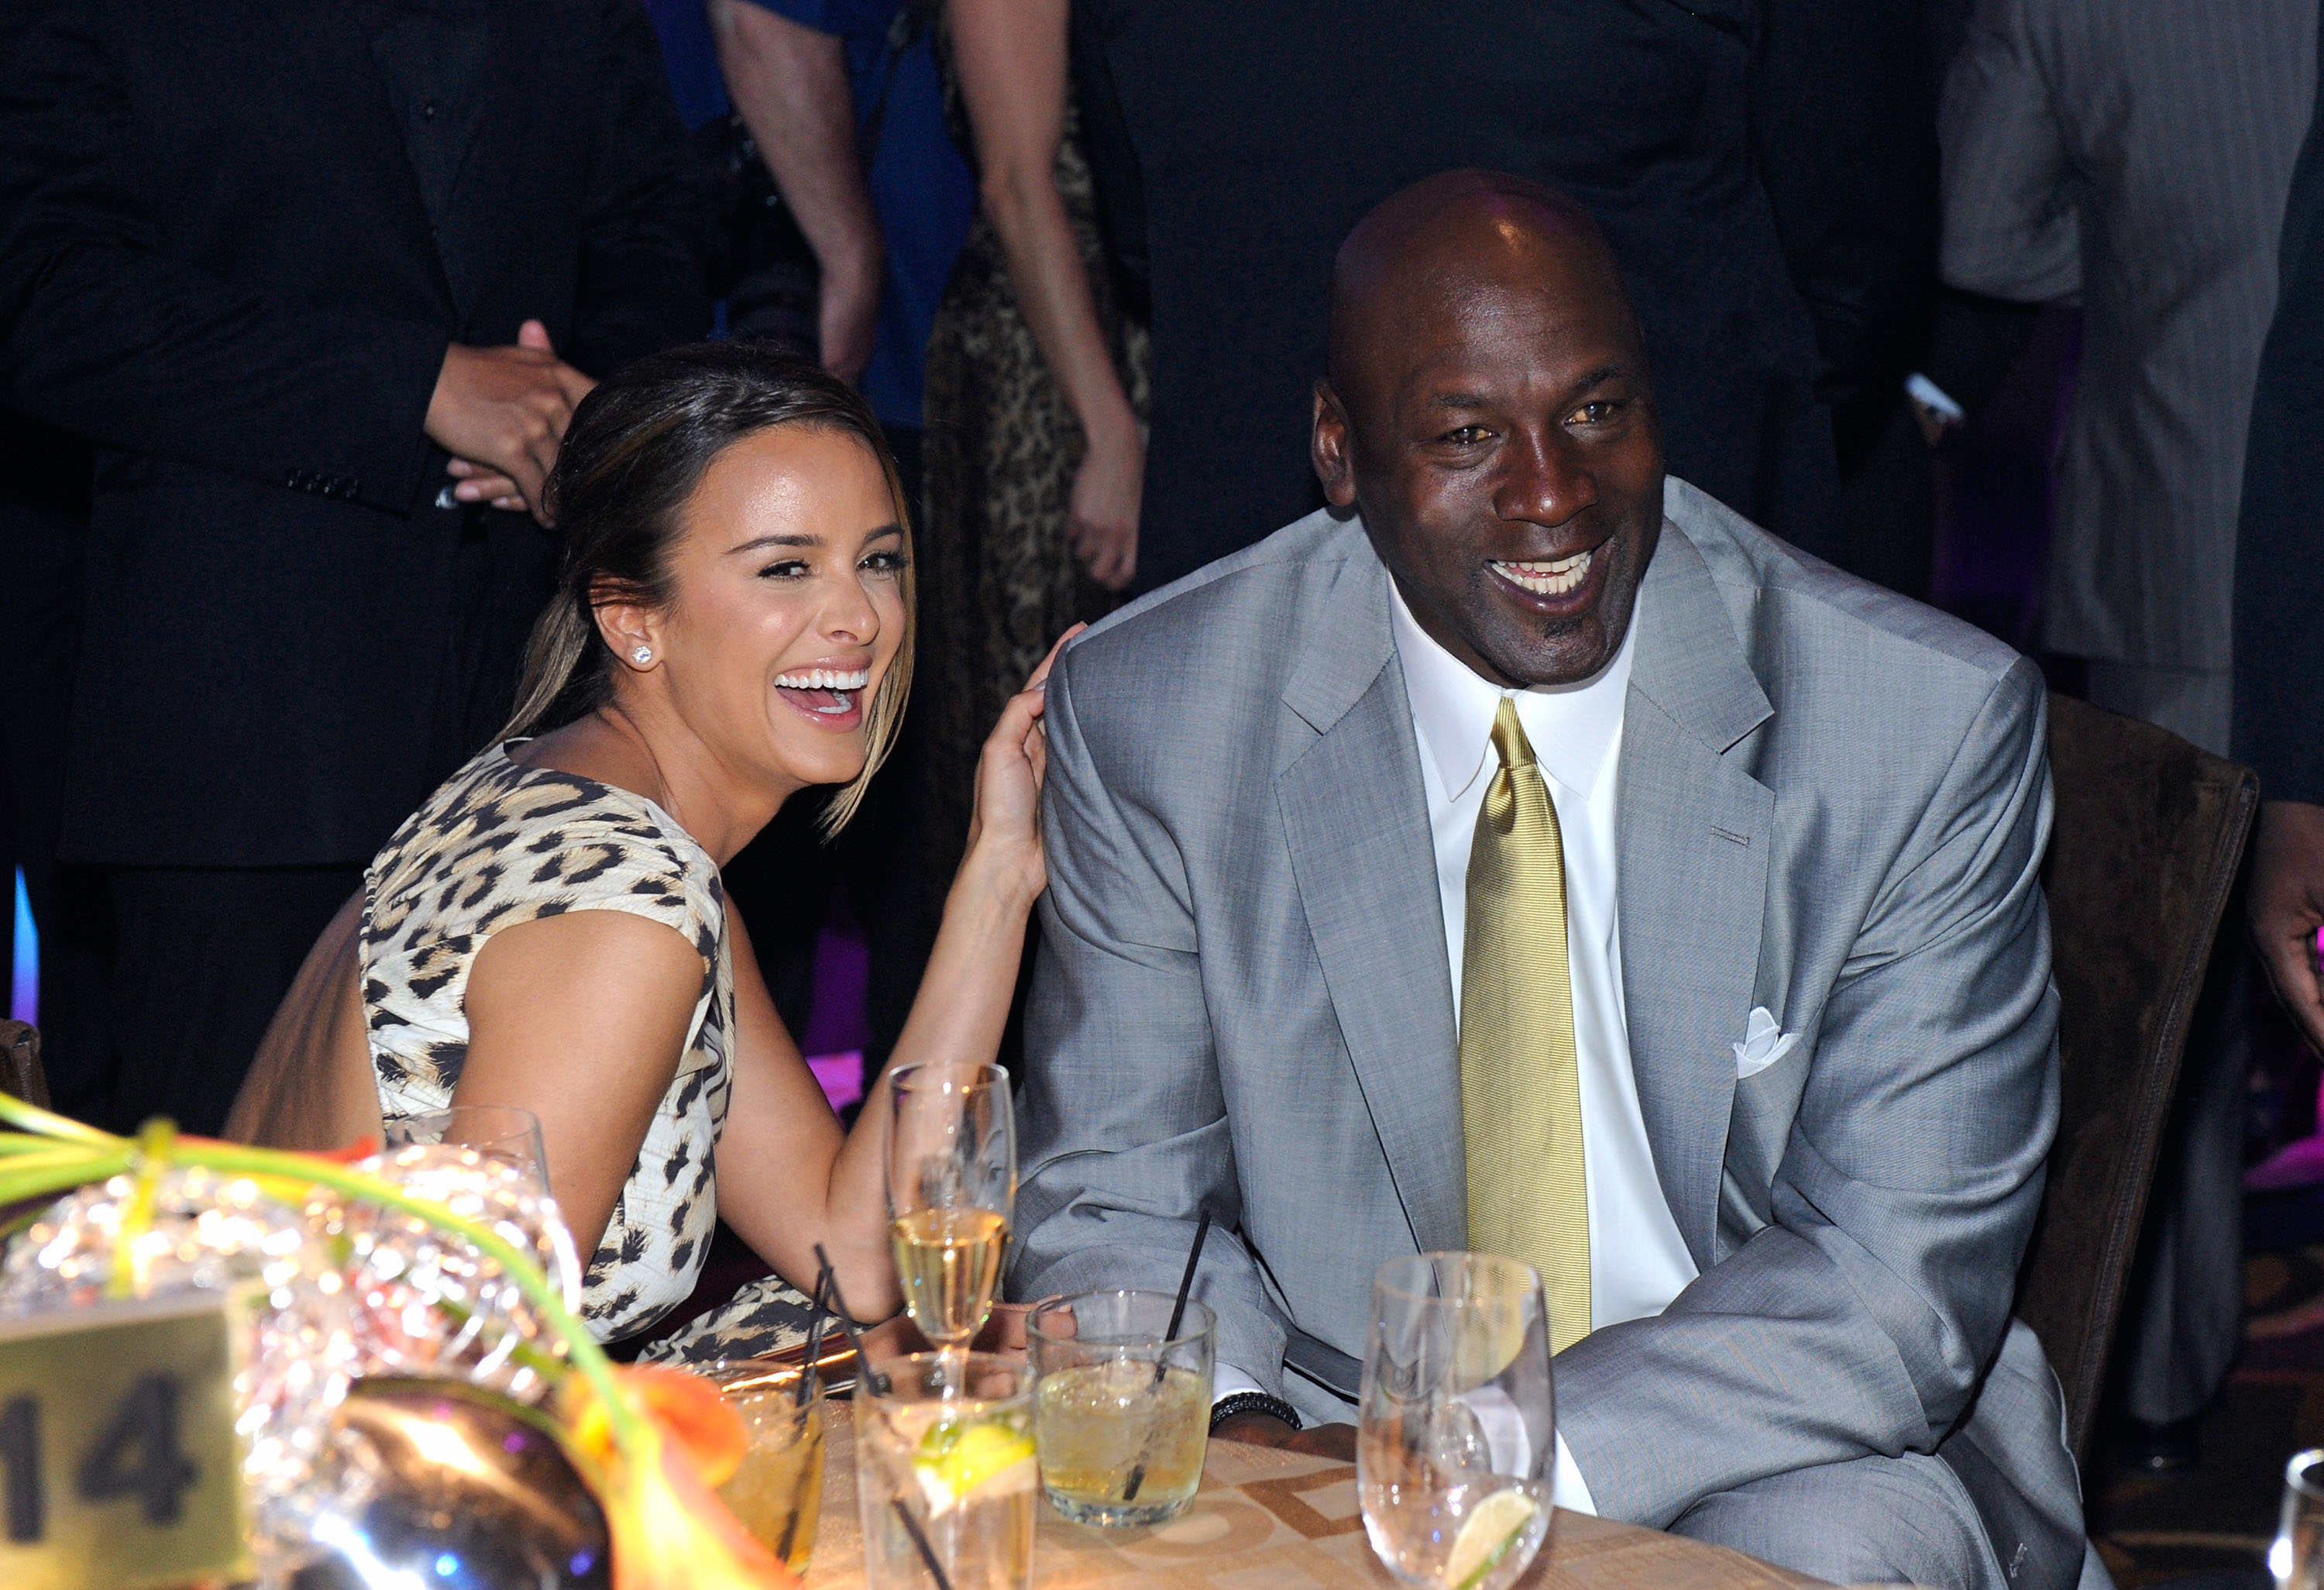 Michael Jordan and Yvette Prieto attend the 11th annual Michael Jordan Celebrity Invitational gala on March 30, 2011 in Las Vegas, Nevada | Source: Getty Images